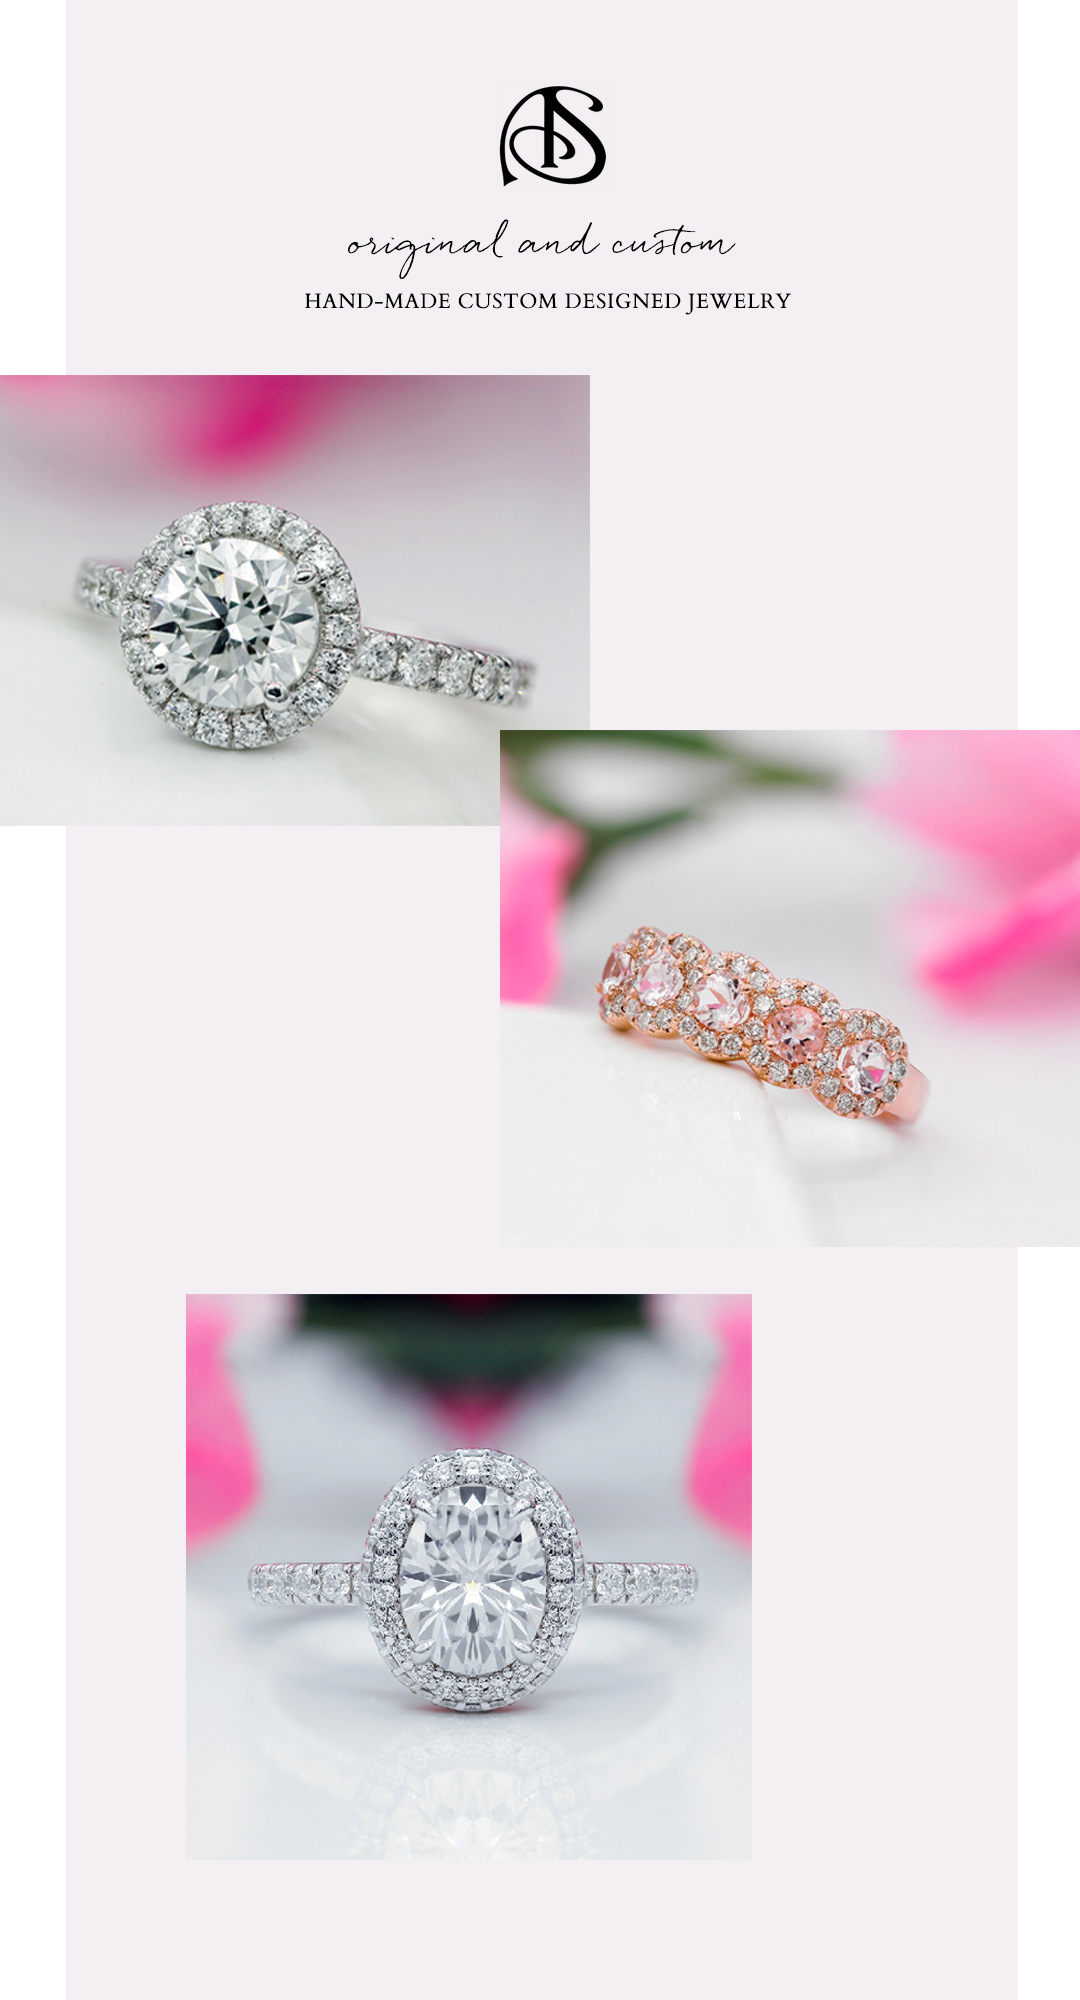 Alexander Sparks hand made engagement rings